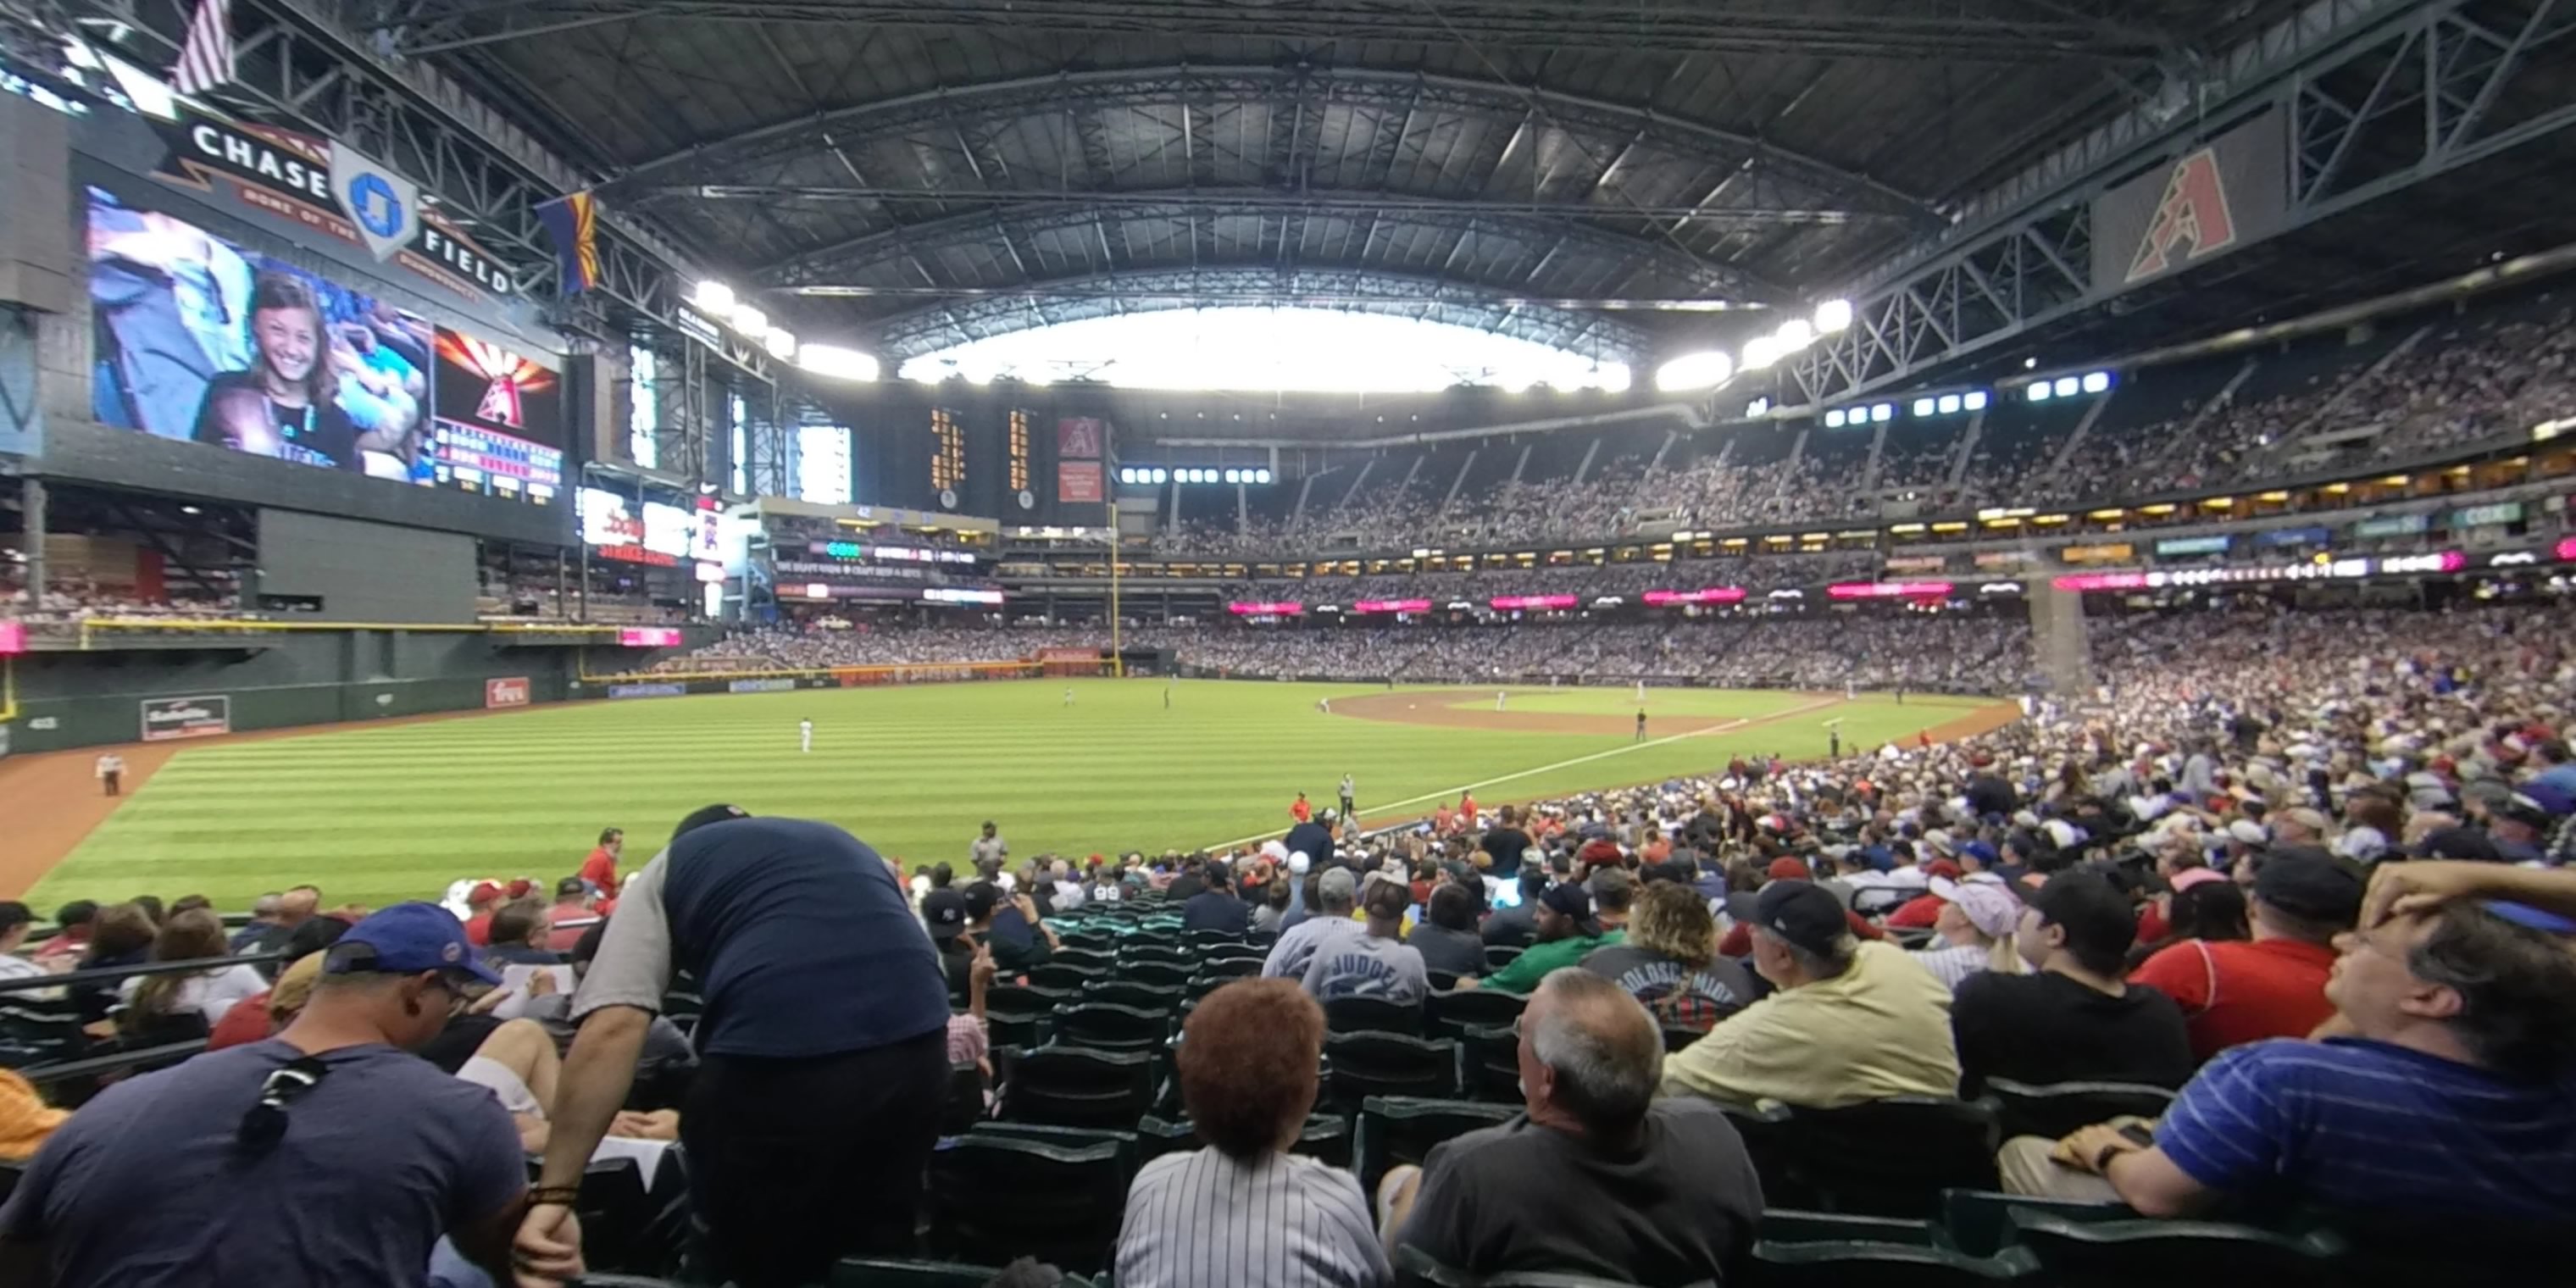 section 135 panoramic seat view  for baseball - chase field